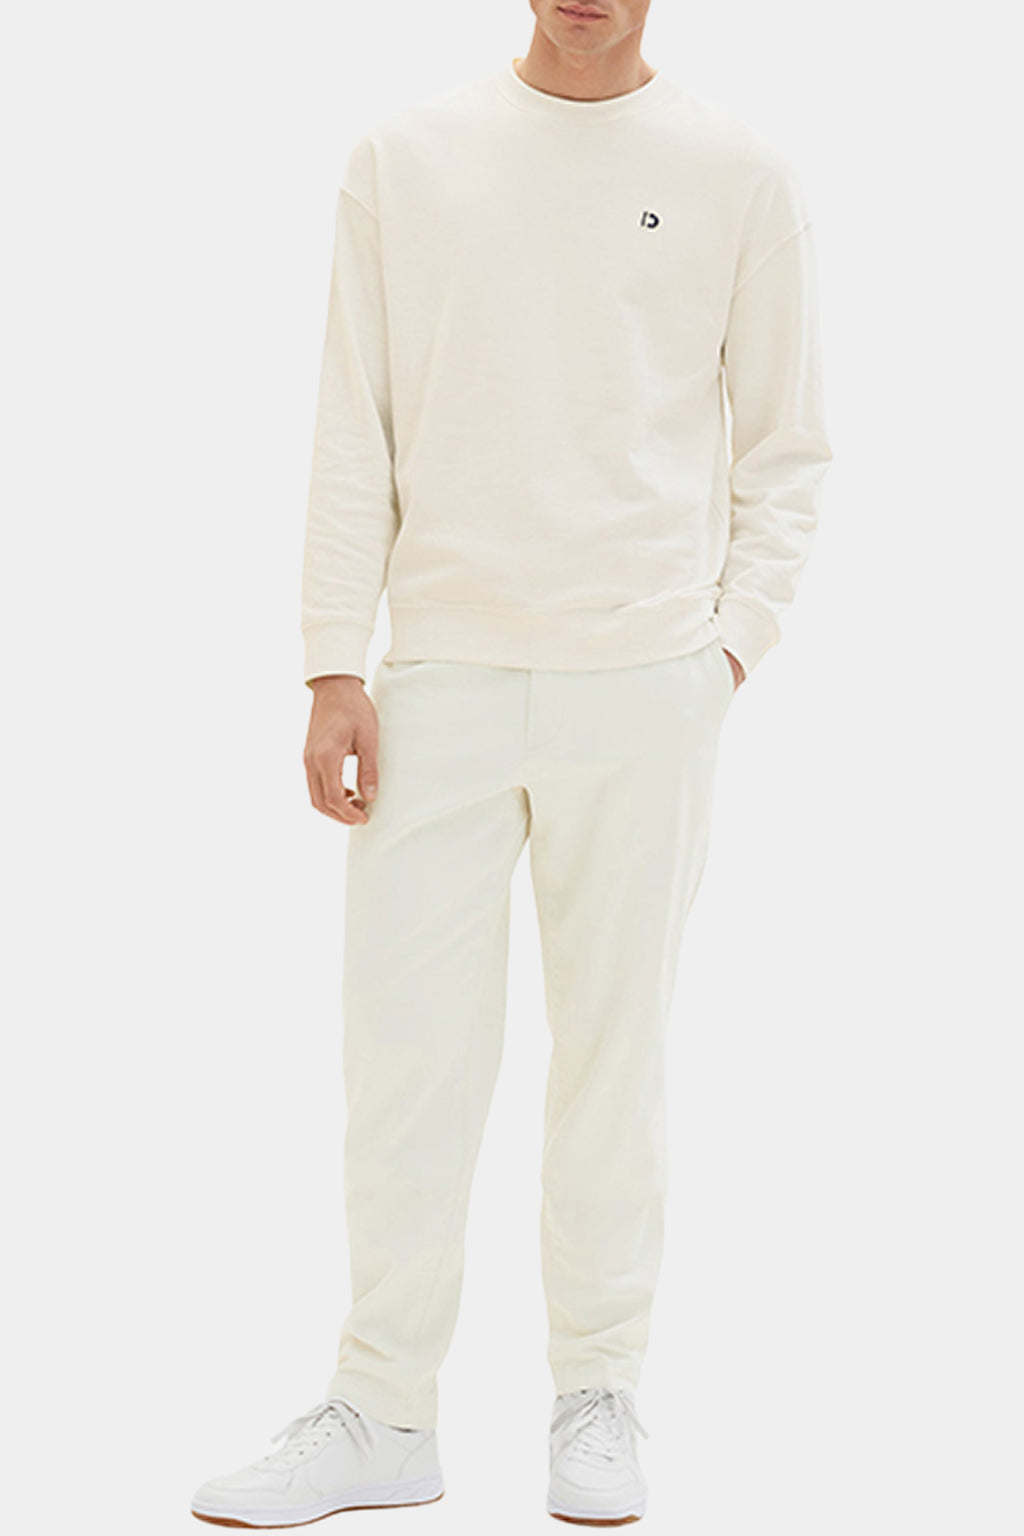 Tom Tailor - Solid Relaxed Fit Chino Pants